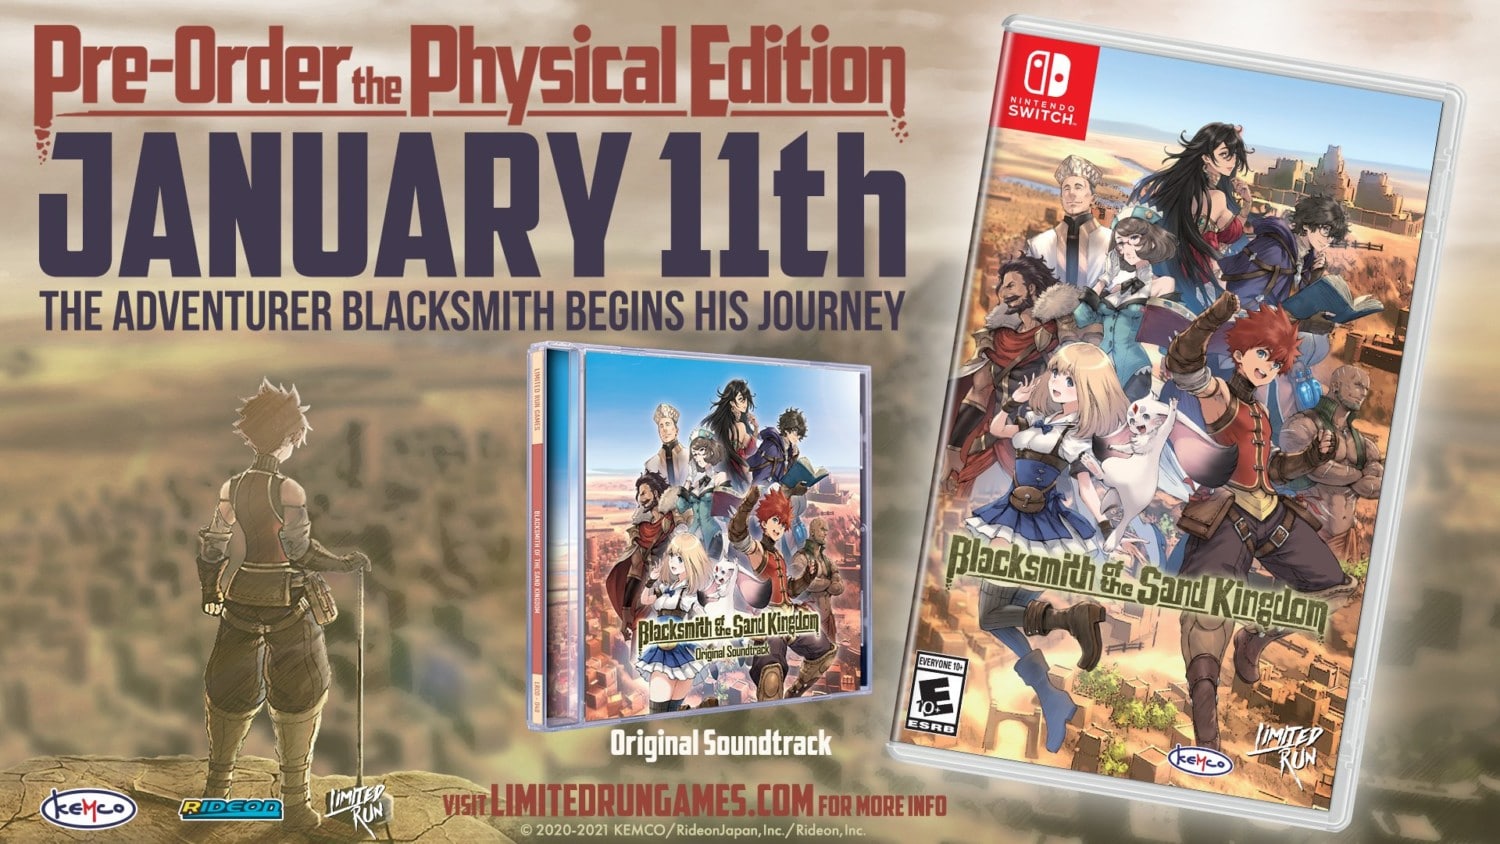 Pre-orders for physical editions of Blacksmith of Sand Kingdom begin January 11